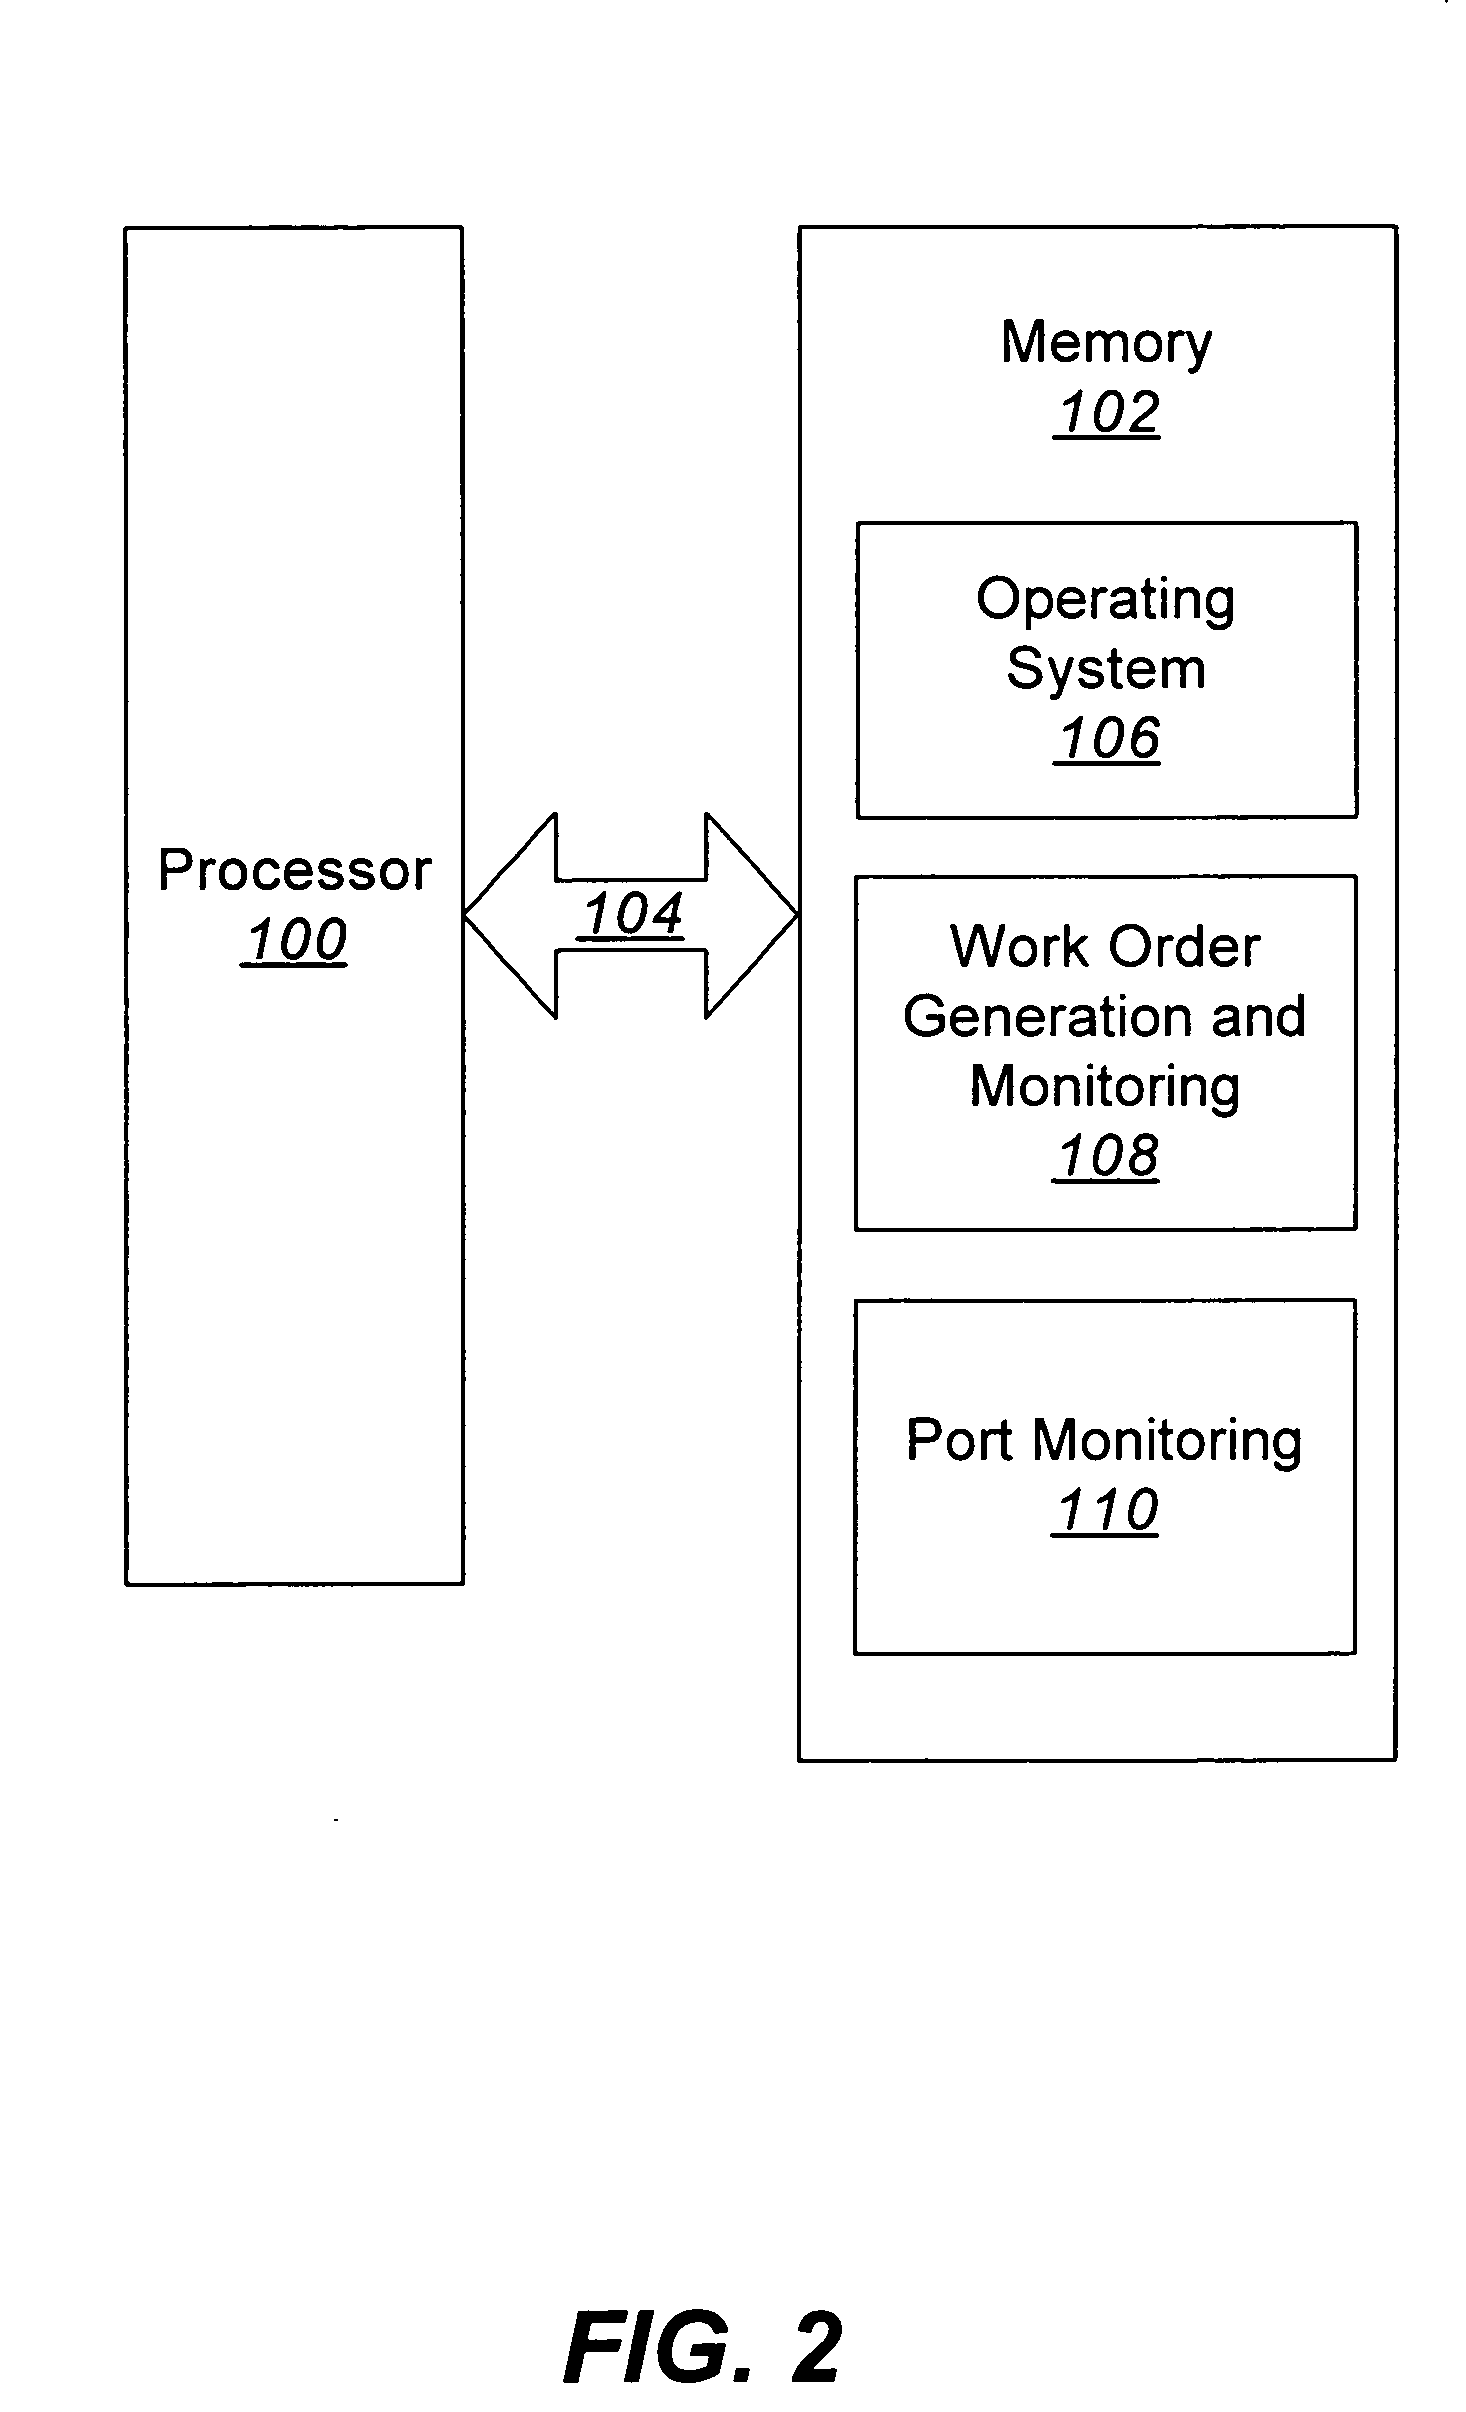 Methods, systems and computer program products for connecting and monitoring network equipment in a telecommunications system